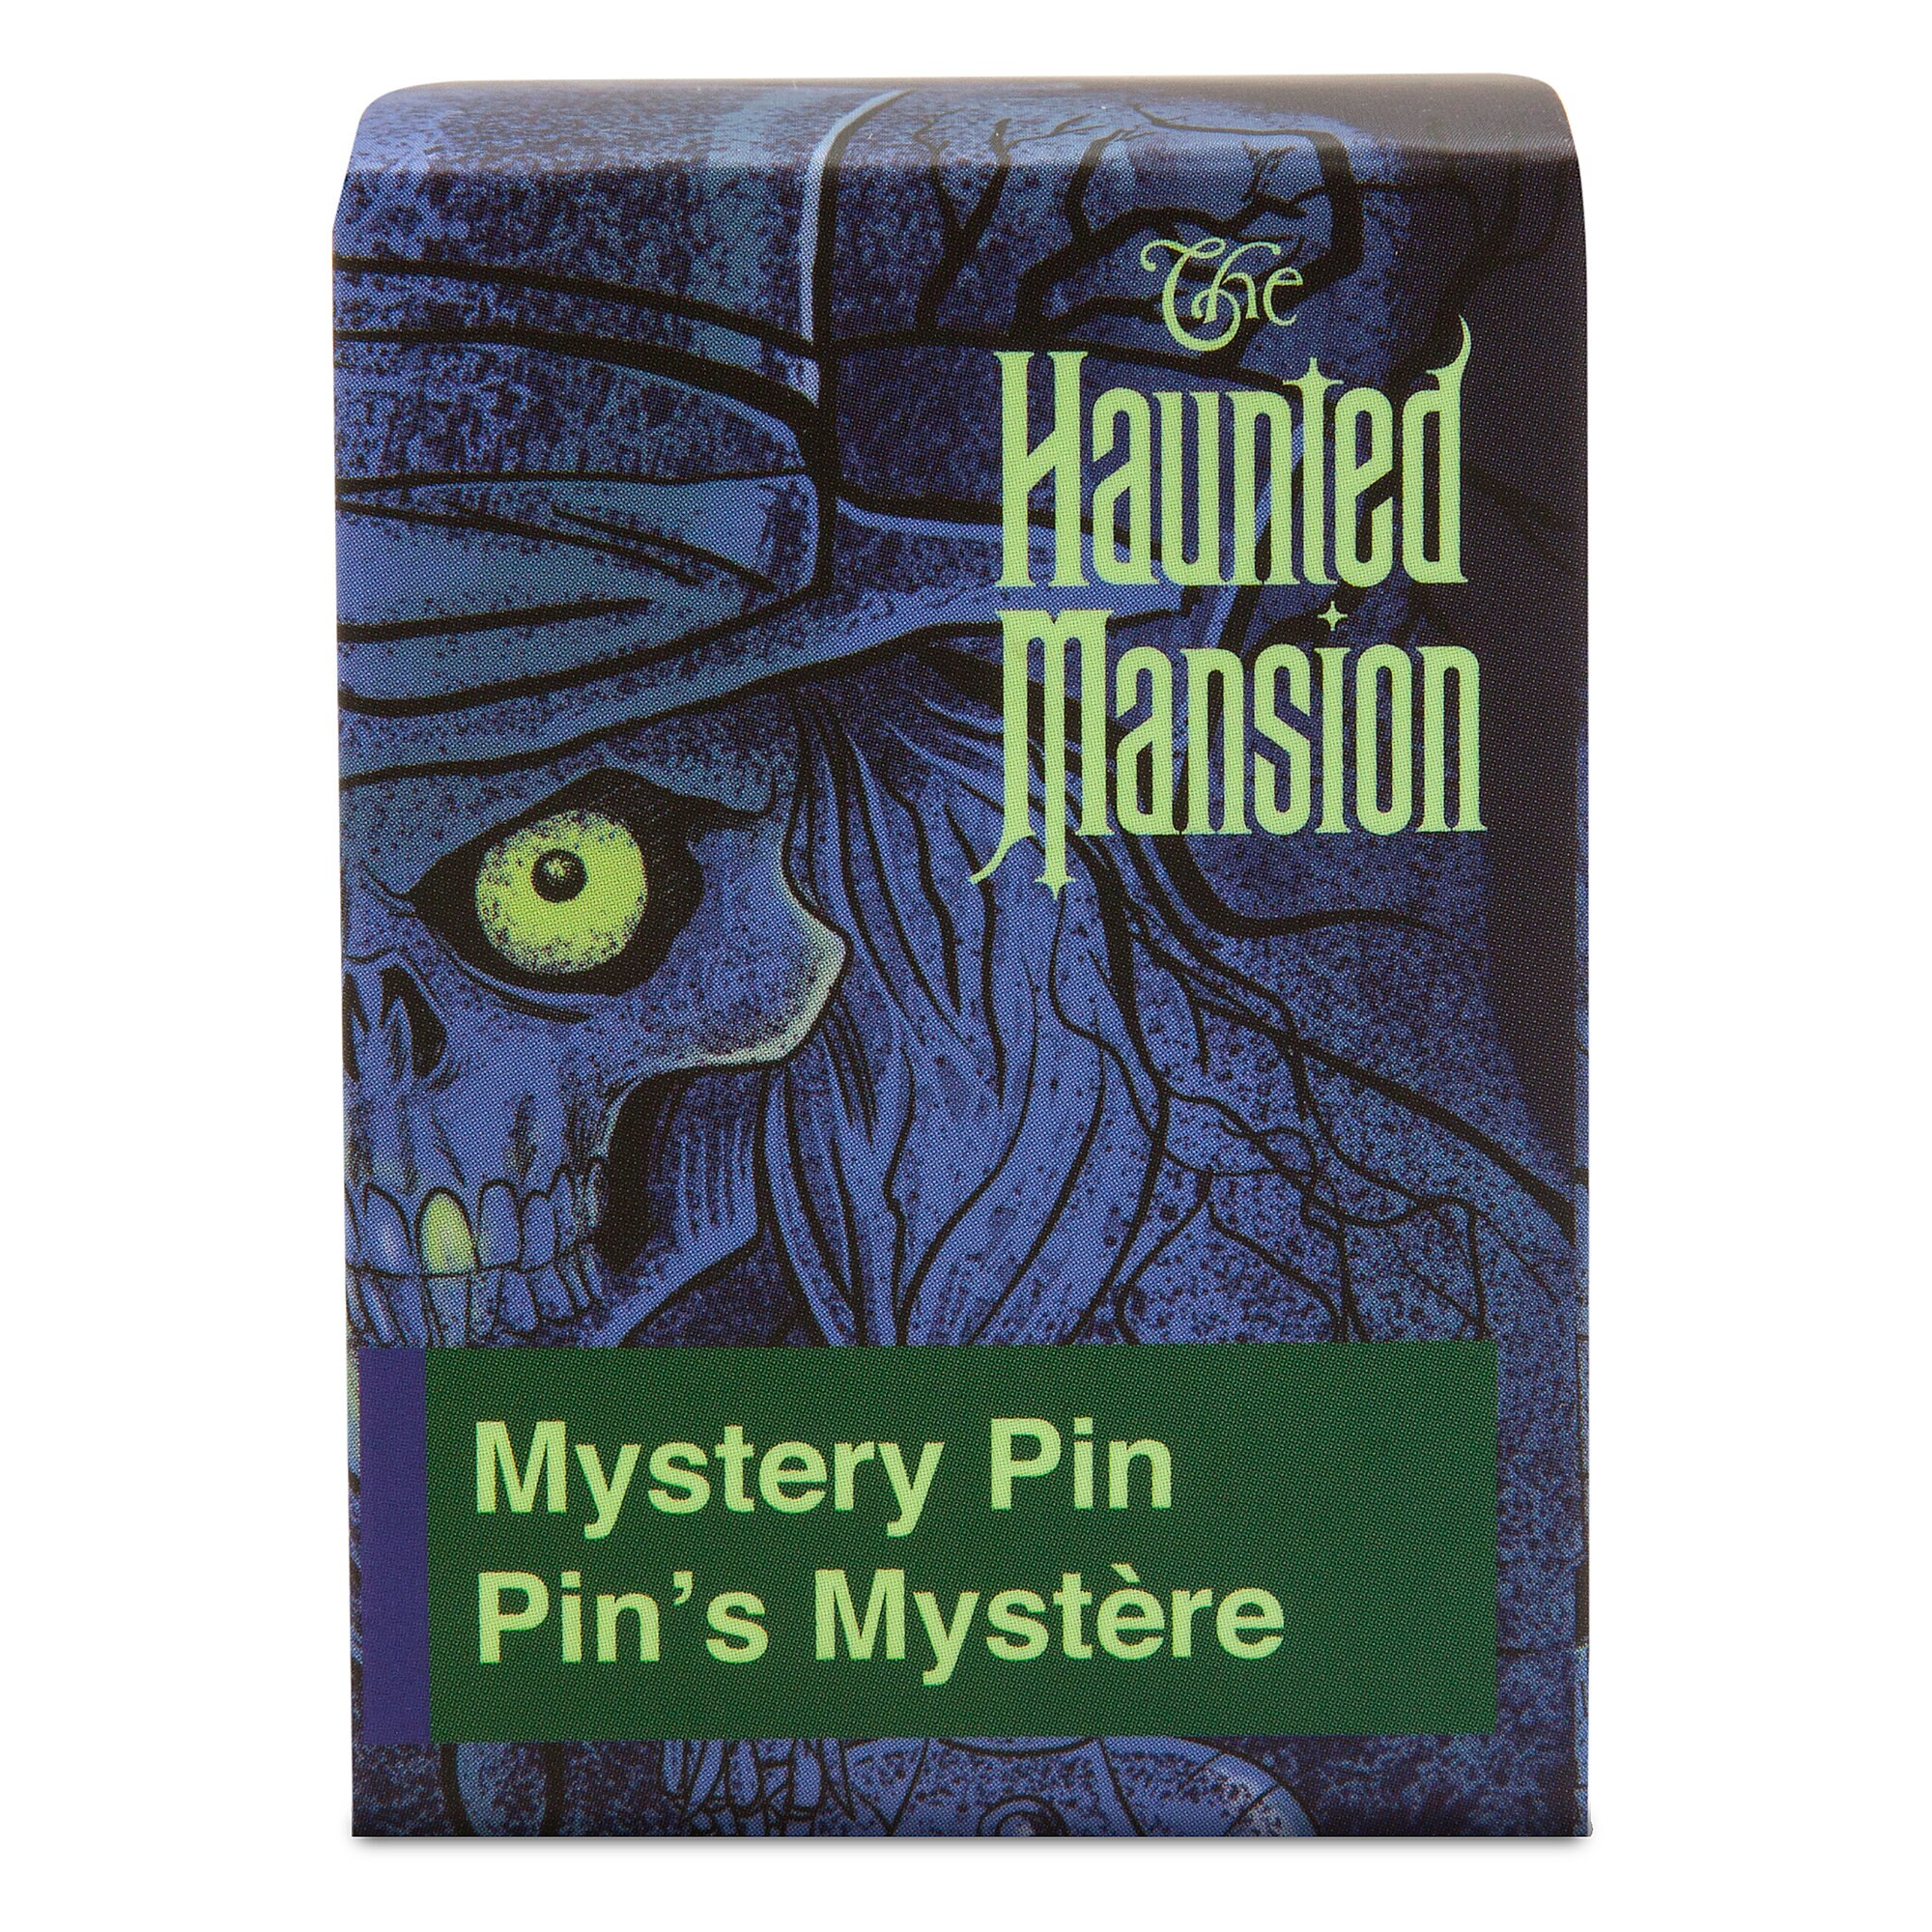 The Haunted Mansion Mystery Pin